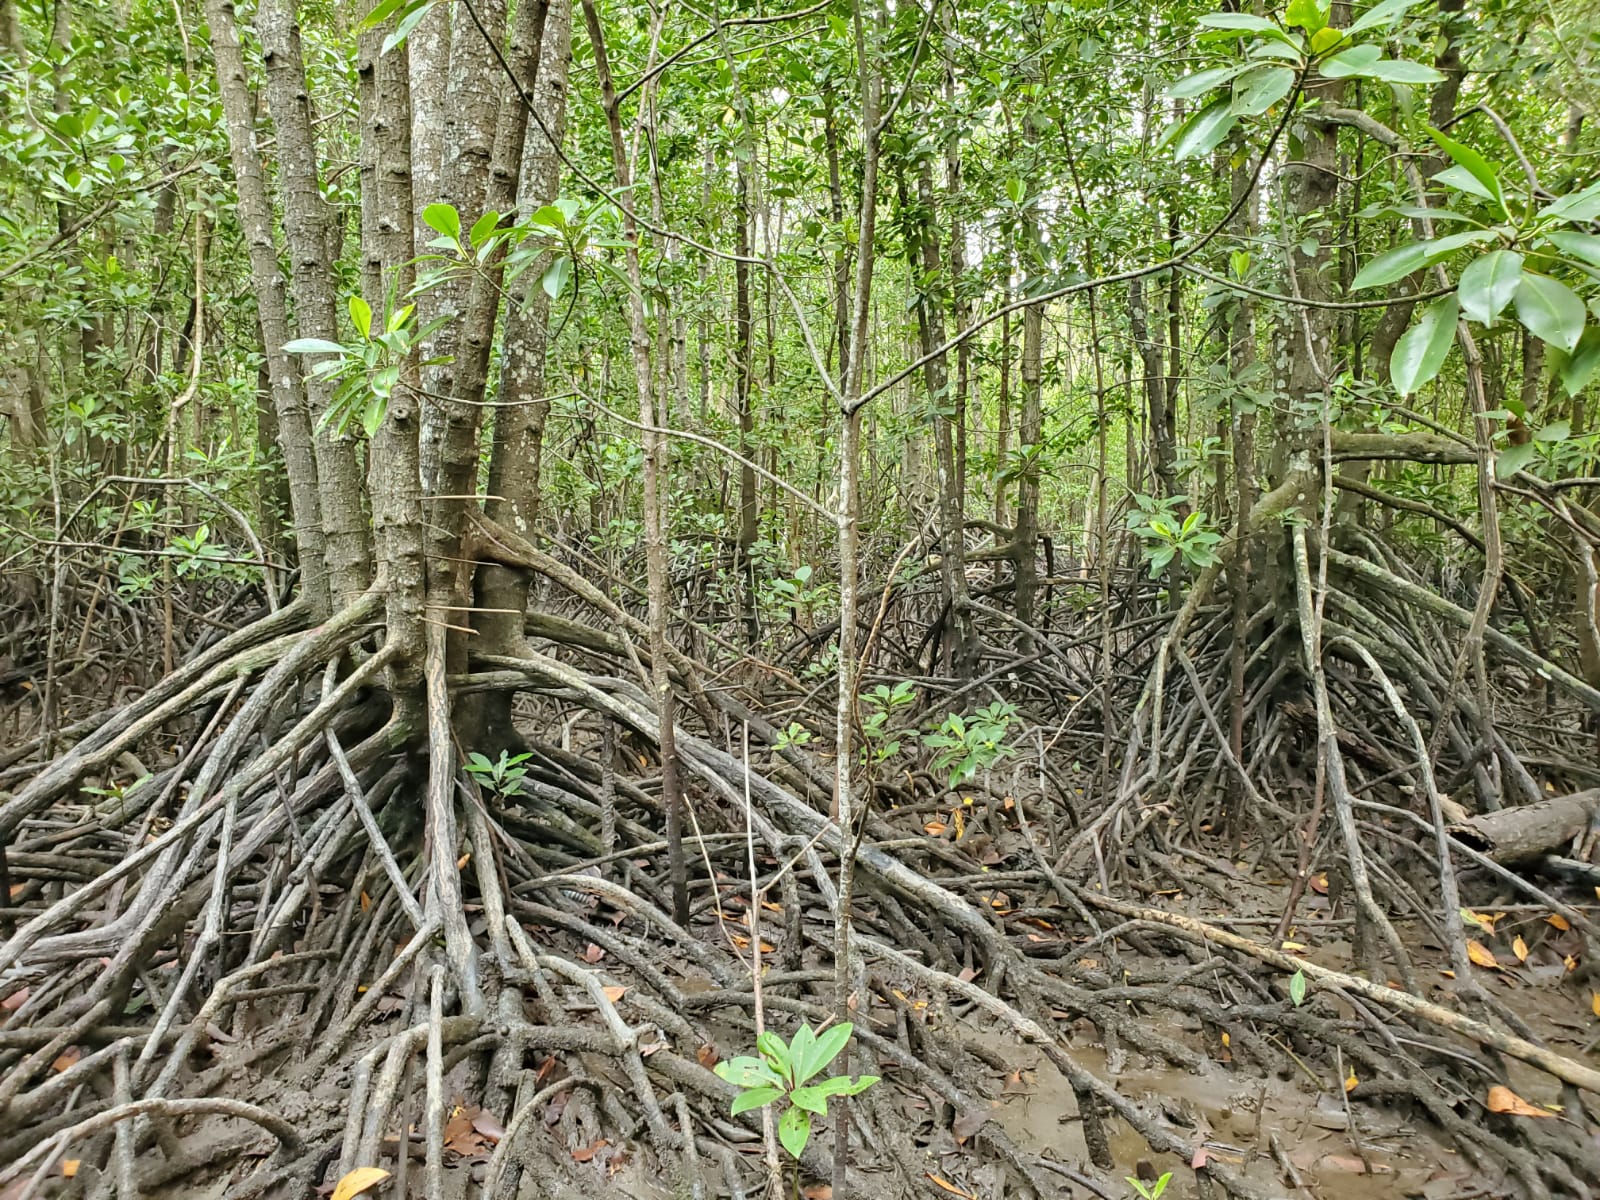 Mangroves, such as this one in Pulau Ubin in Singapore, reduce wave energy and help preserve the coasts from erosion. They can also reduce the impacts from some natural hazards such as tsunamis (Source: Tim Shaw/ Earth Observatory of Singapore)